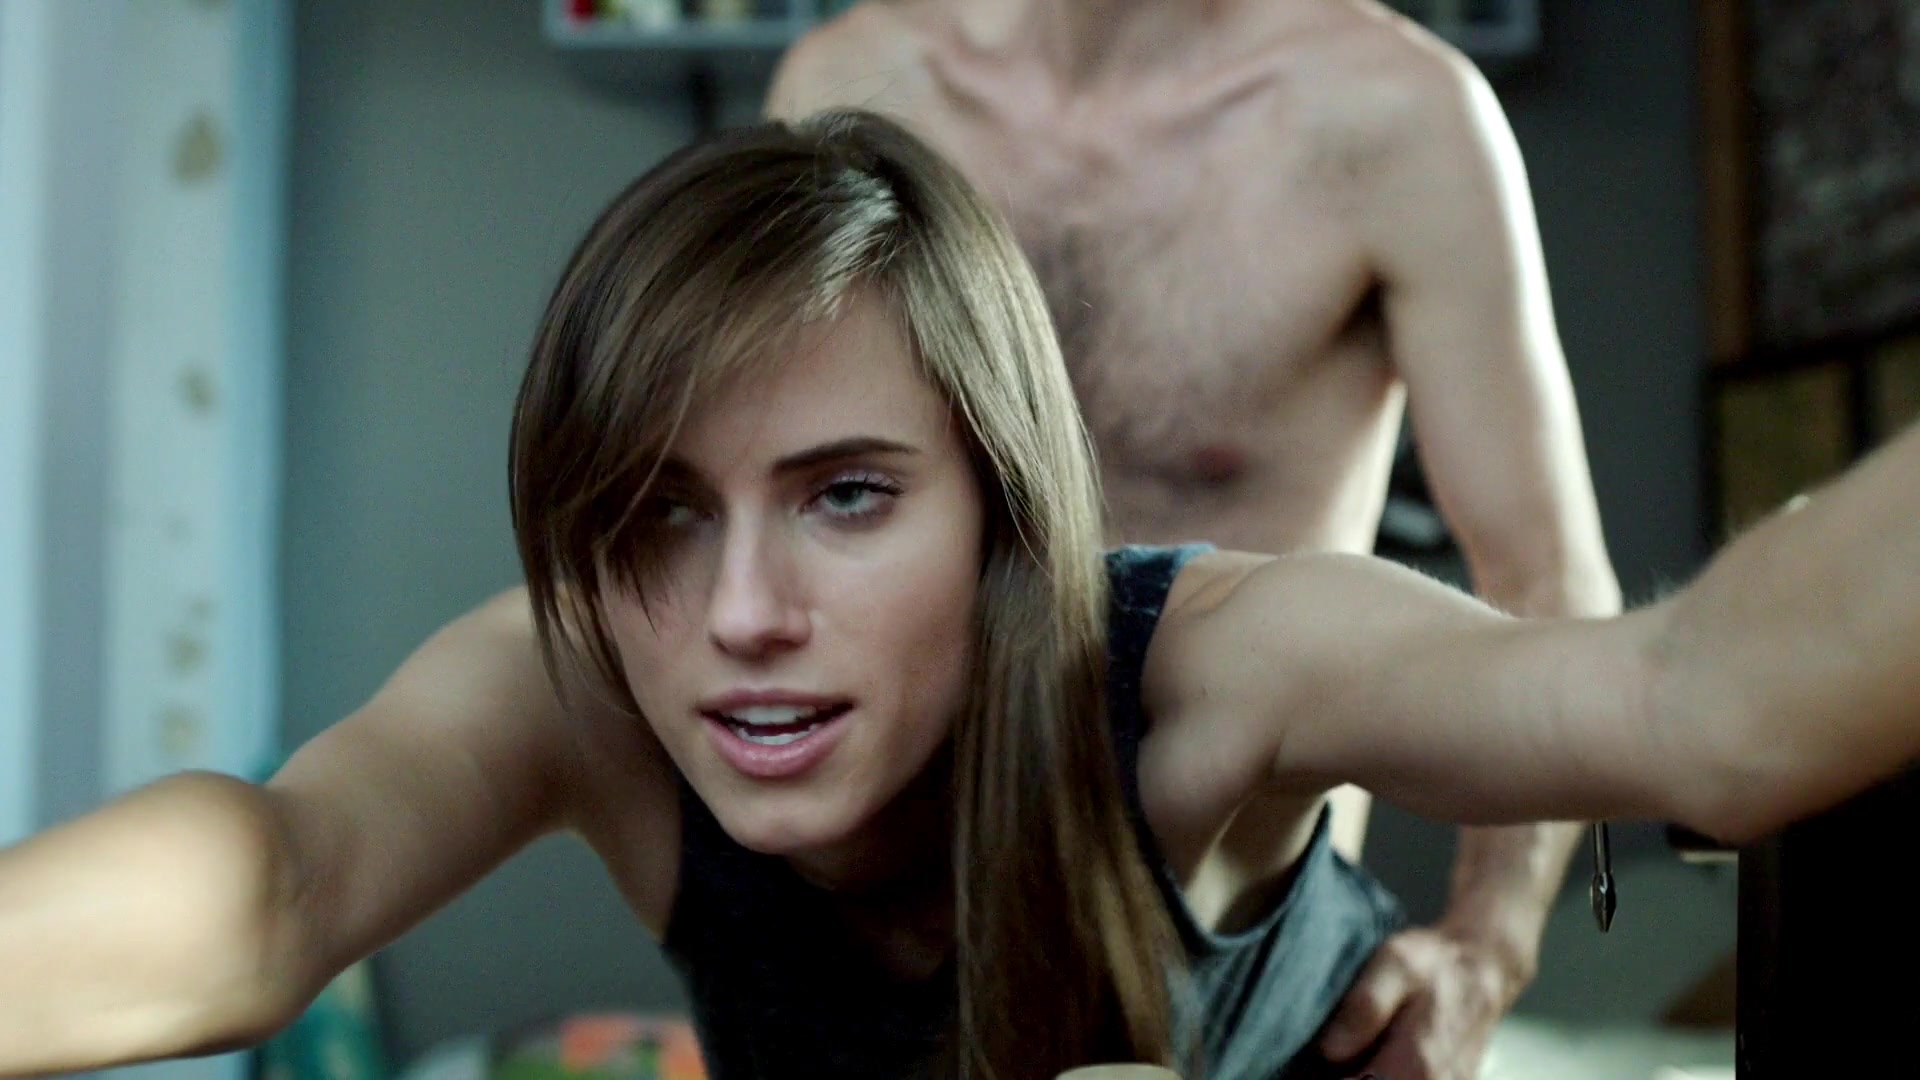 Allison Williams Doggy Style Sex In The Kitchen From Girls Series ...